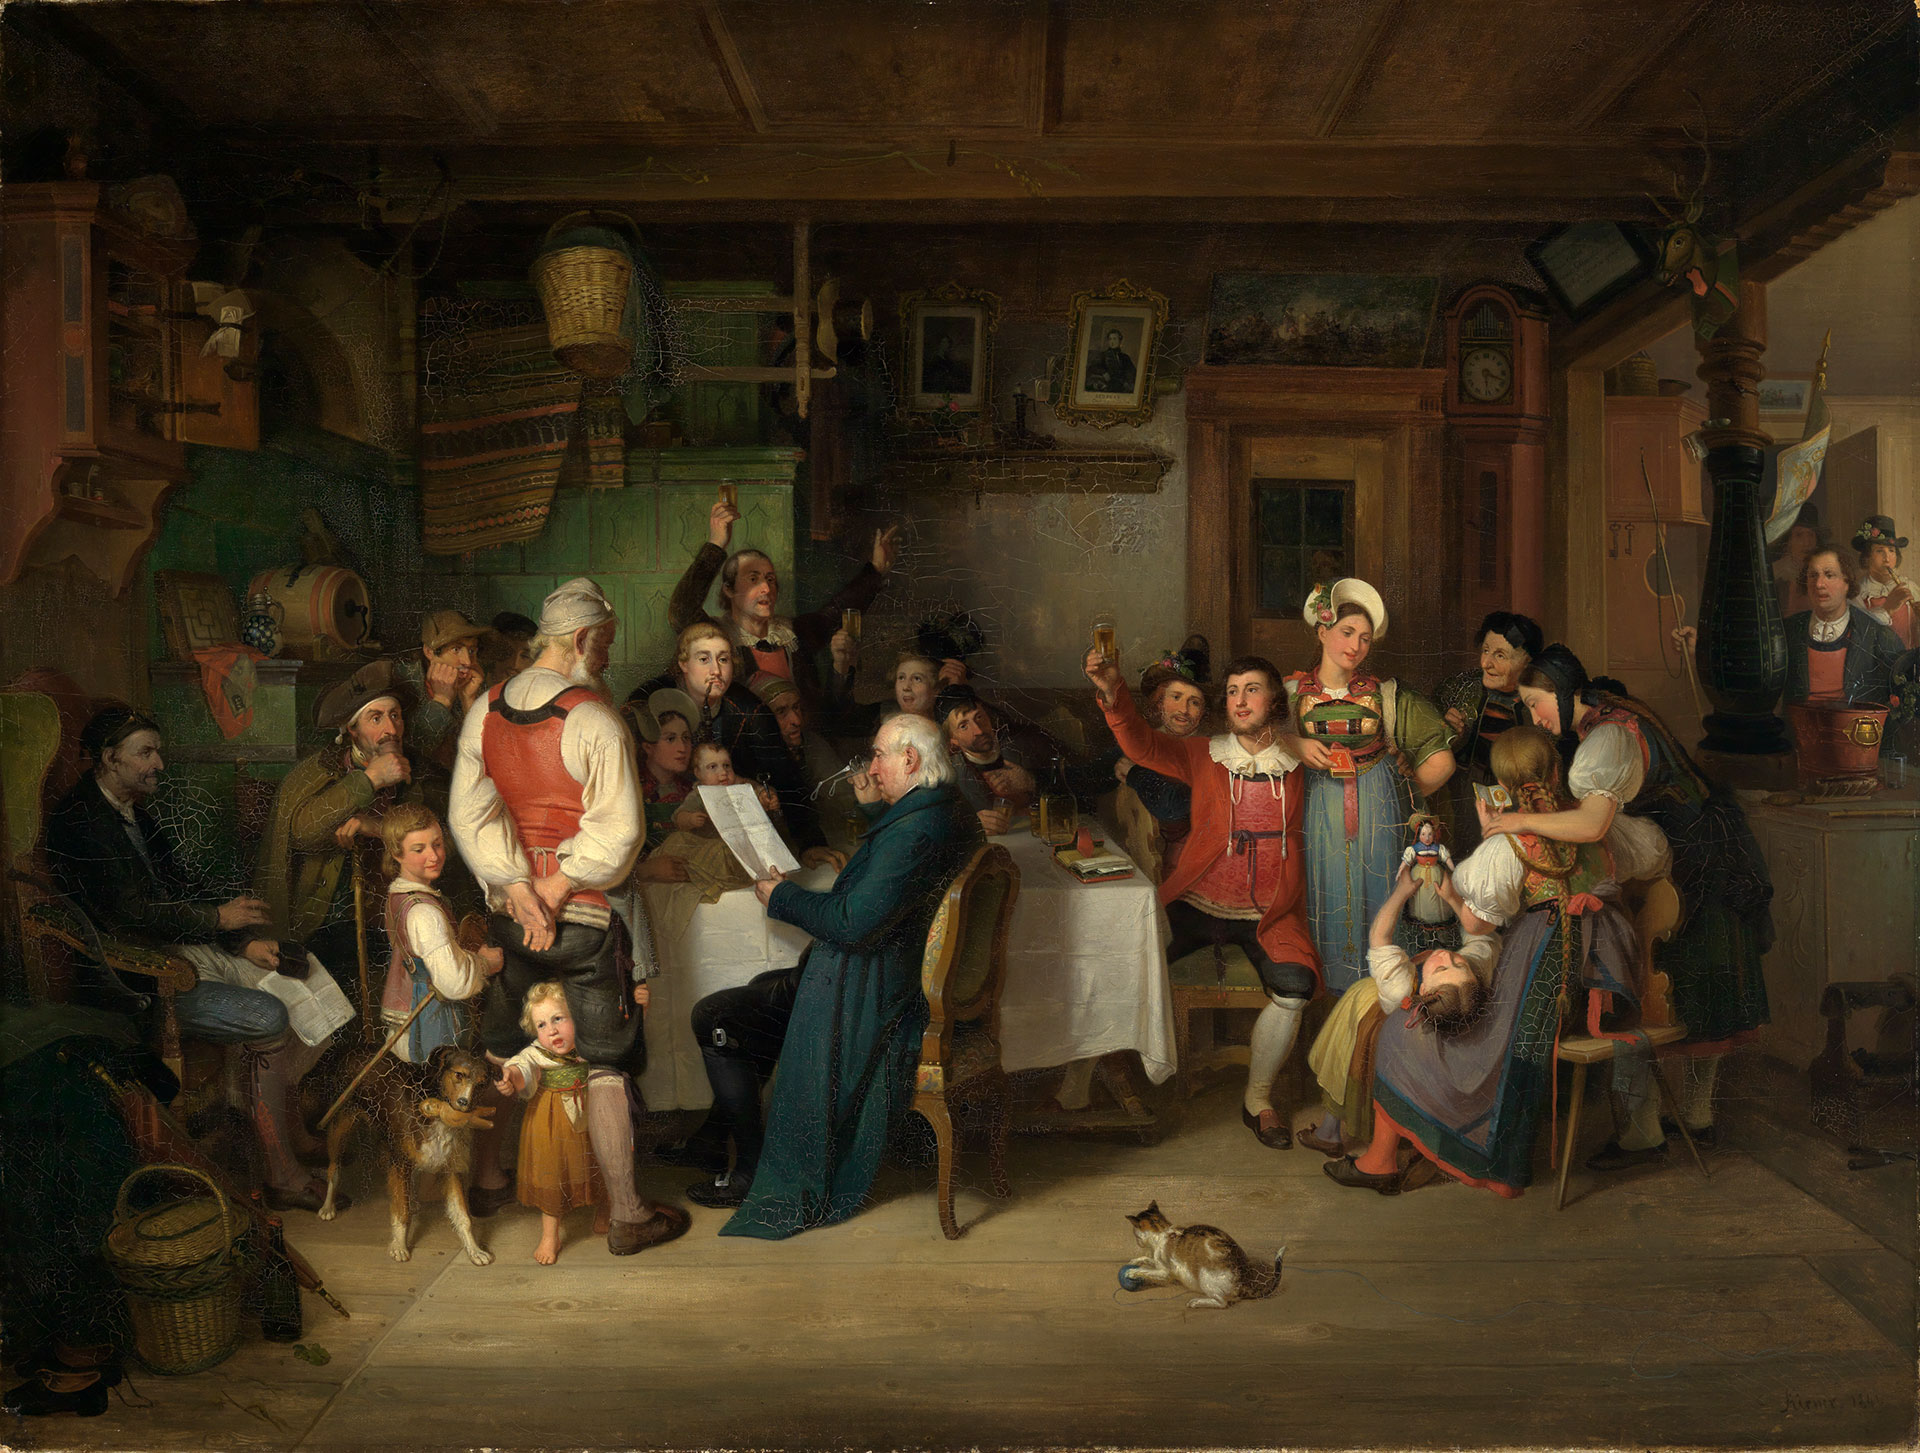 Illustration of the work "The award ceremony of the agricultural association in a Hotzenwald farmhouse" by Johann Baptist Kirner, created in 1841. You can see a farmhouse with a group of people gathered around a table. The work of art is located in the Staatliche Kunsthalle Karlsruhe.